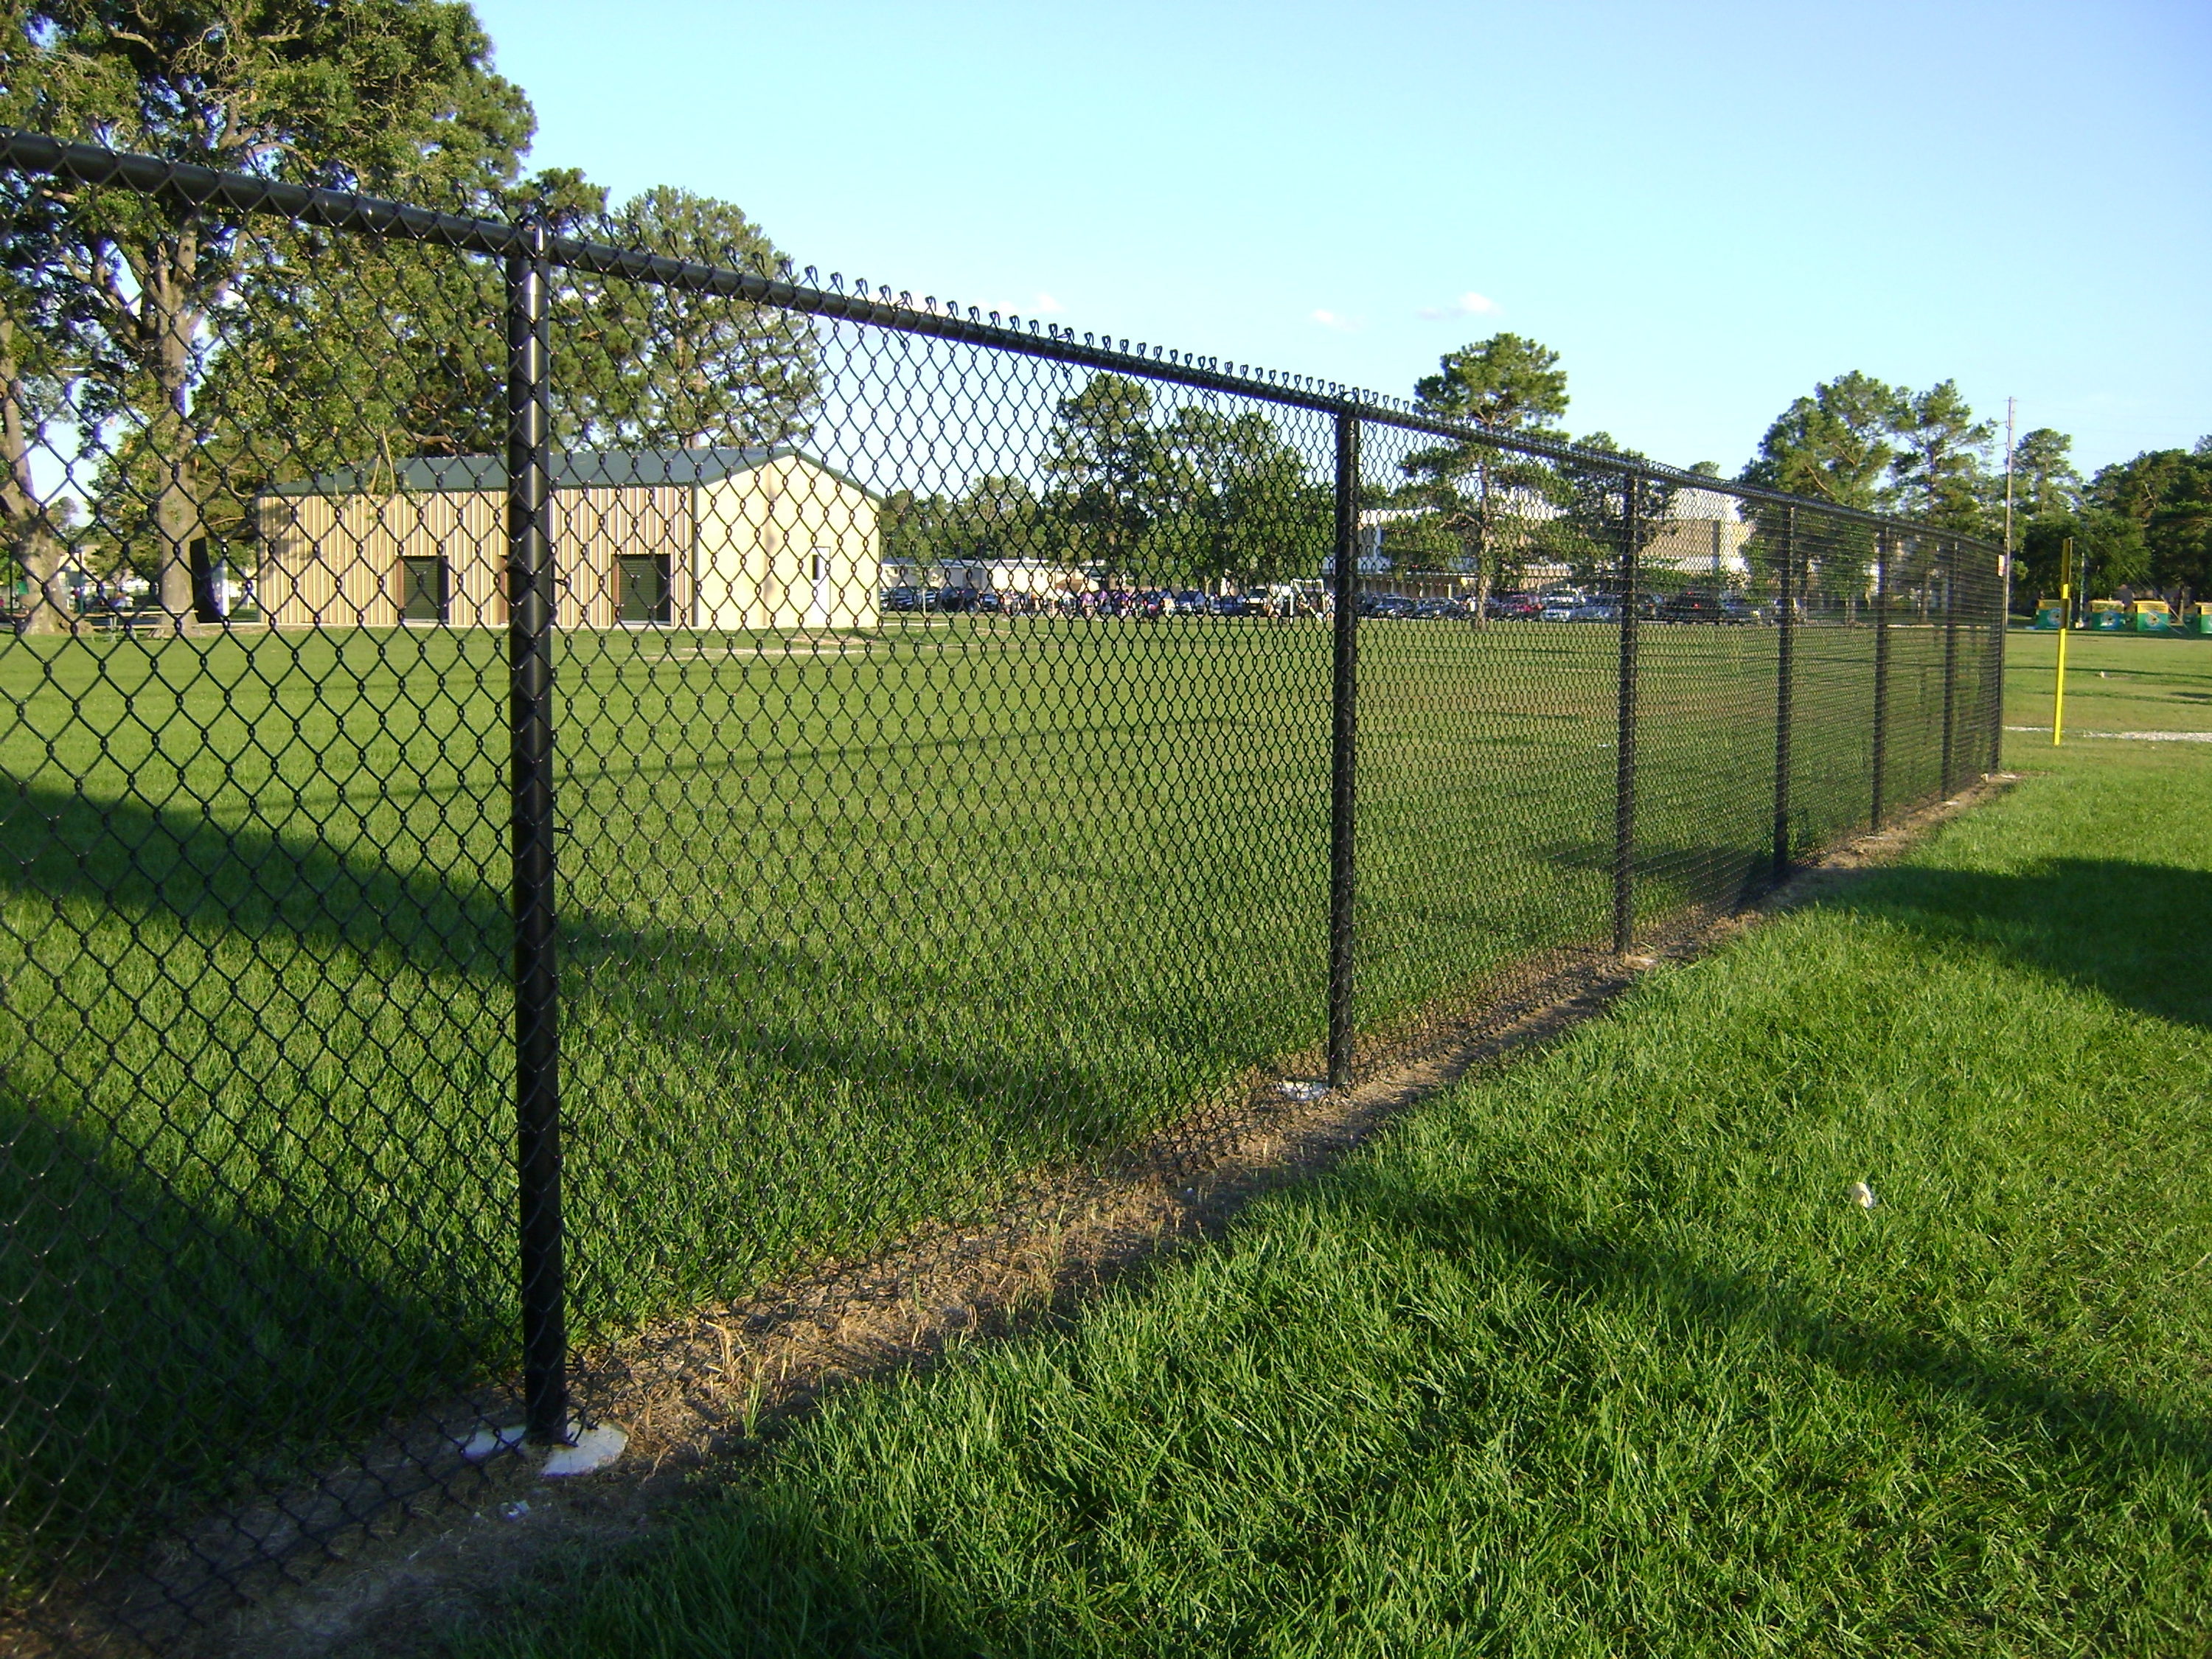 10-1/2-ft W 17-Gauge Vinyl Coated Steel Chain Link Fence Rail in the Chain Link Fencing department at Lowes